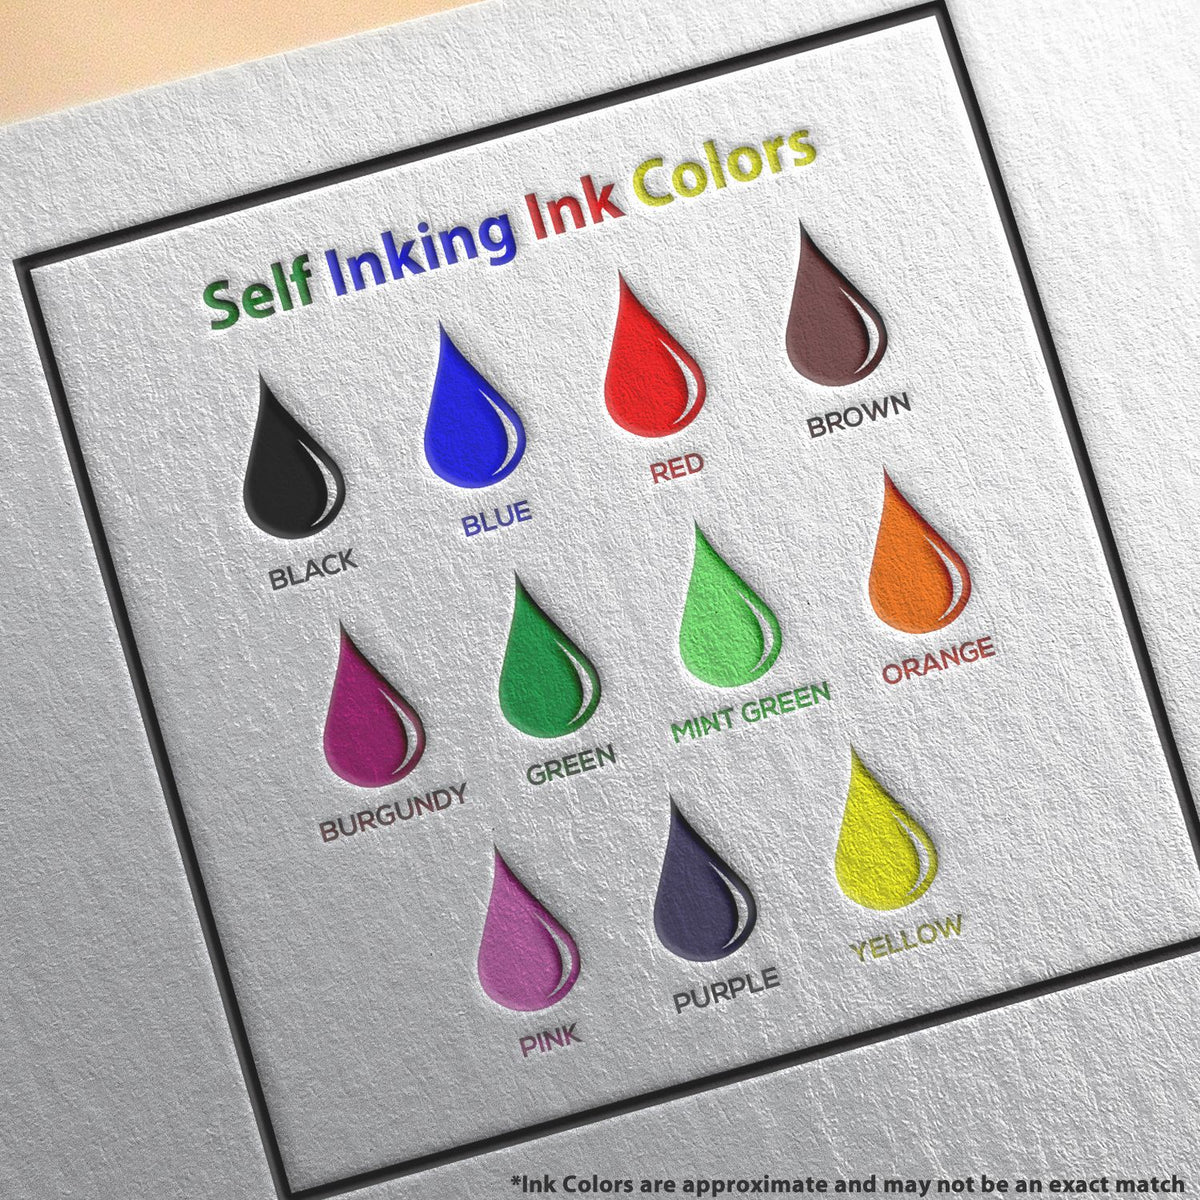 A picture showing the different ink colors or hues available for the Heavy-Duty Alaska Rectangular Notary Stamp product.